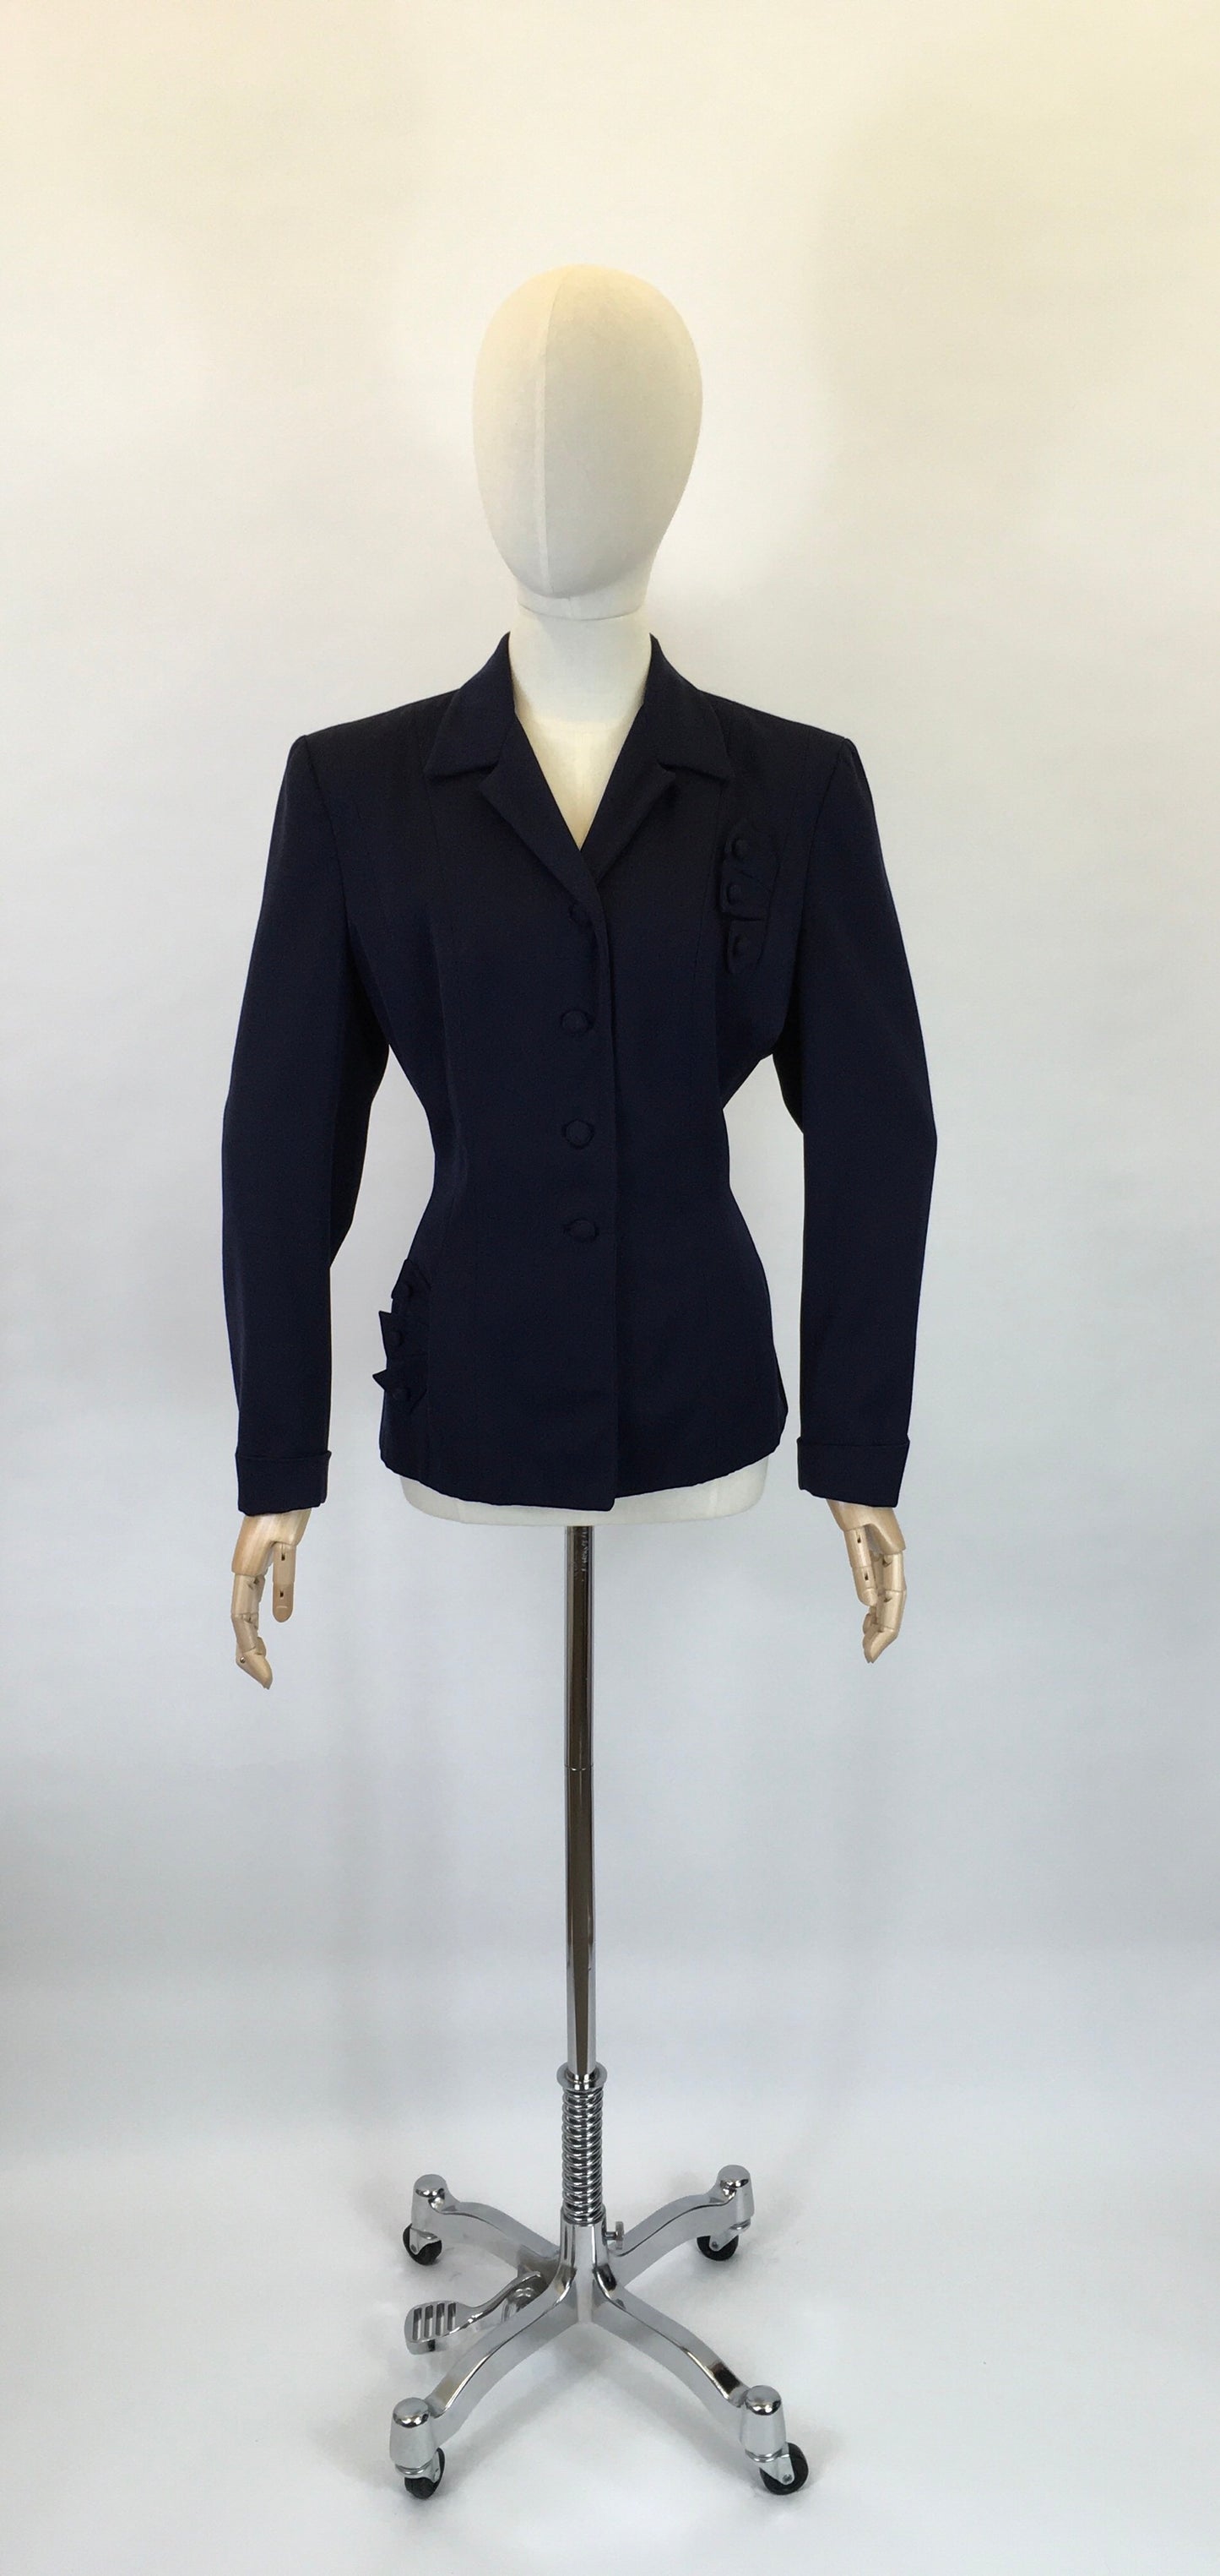 Original 1940’s Navy Gabardine Jacket - With Beautiful Shaped Adornments with Matching Buttons